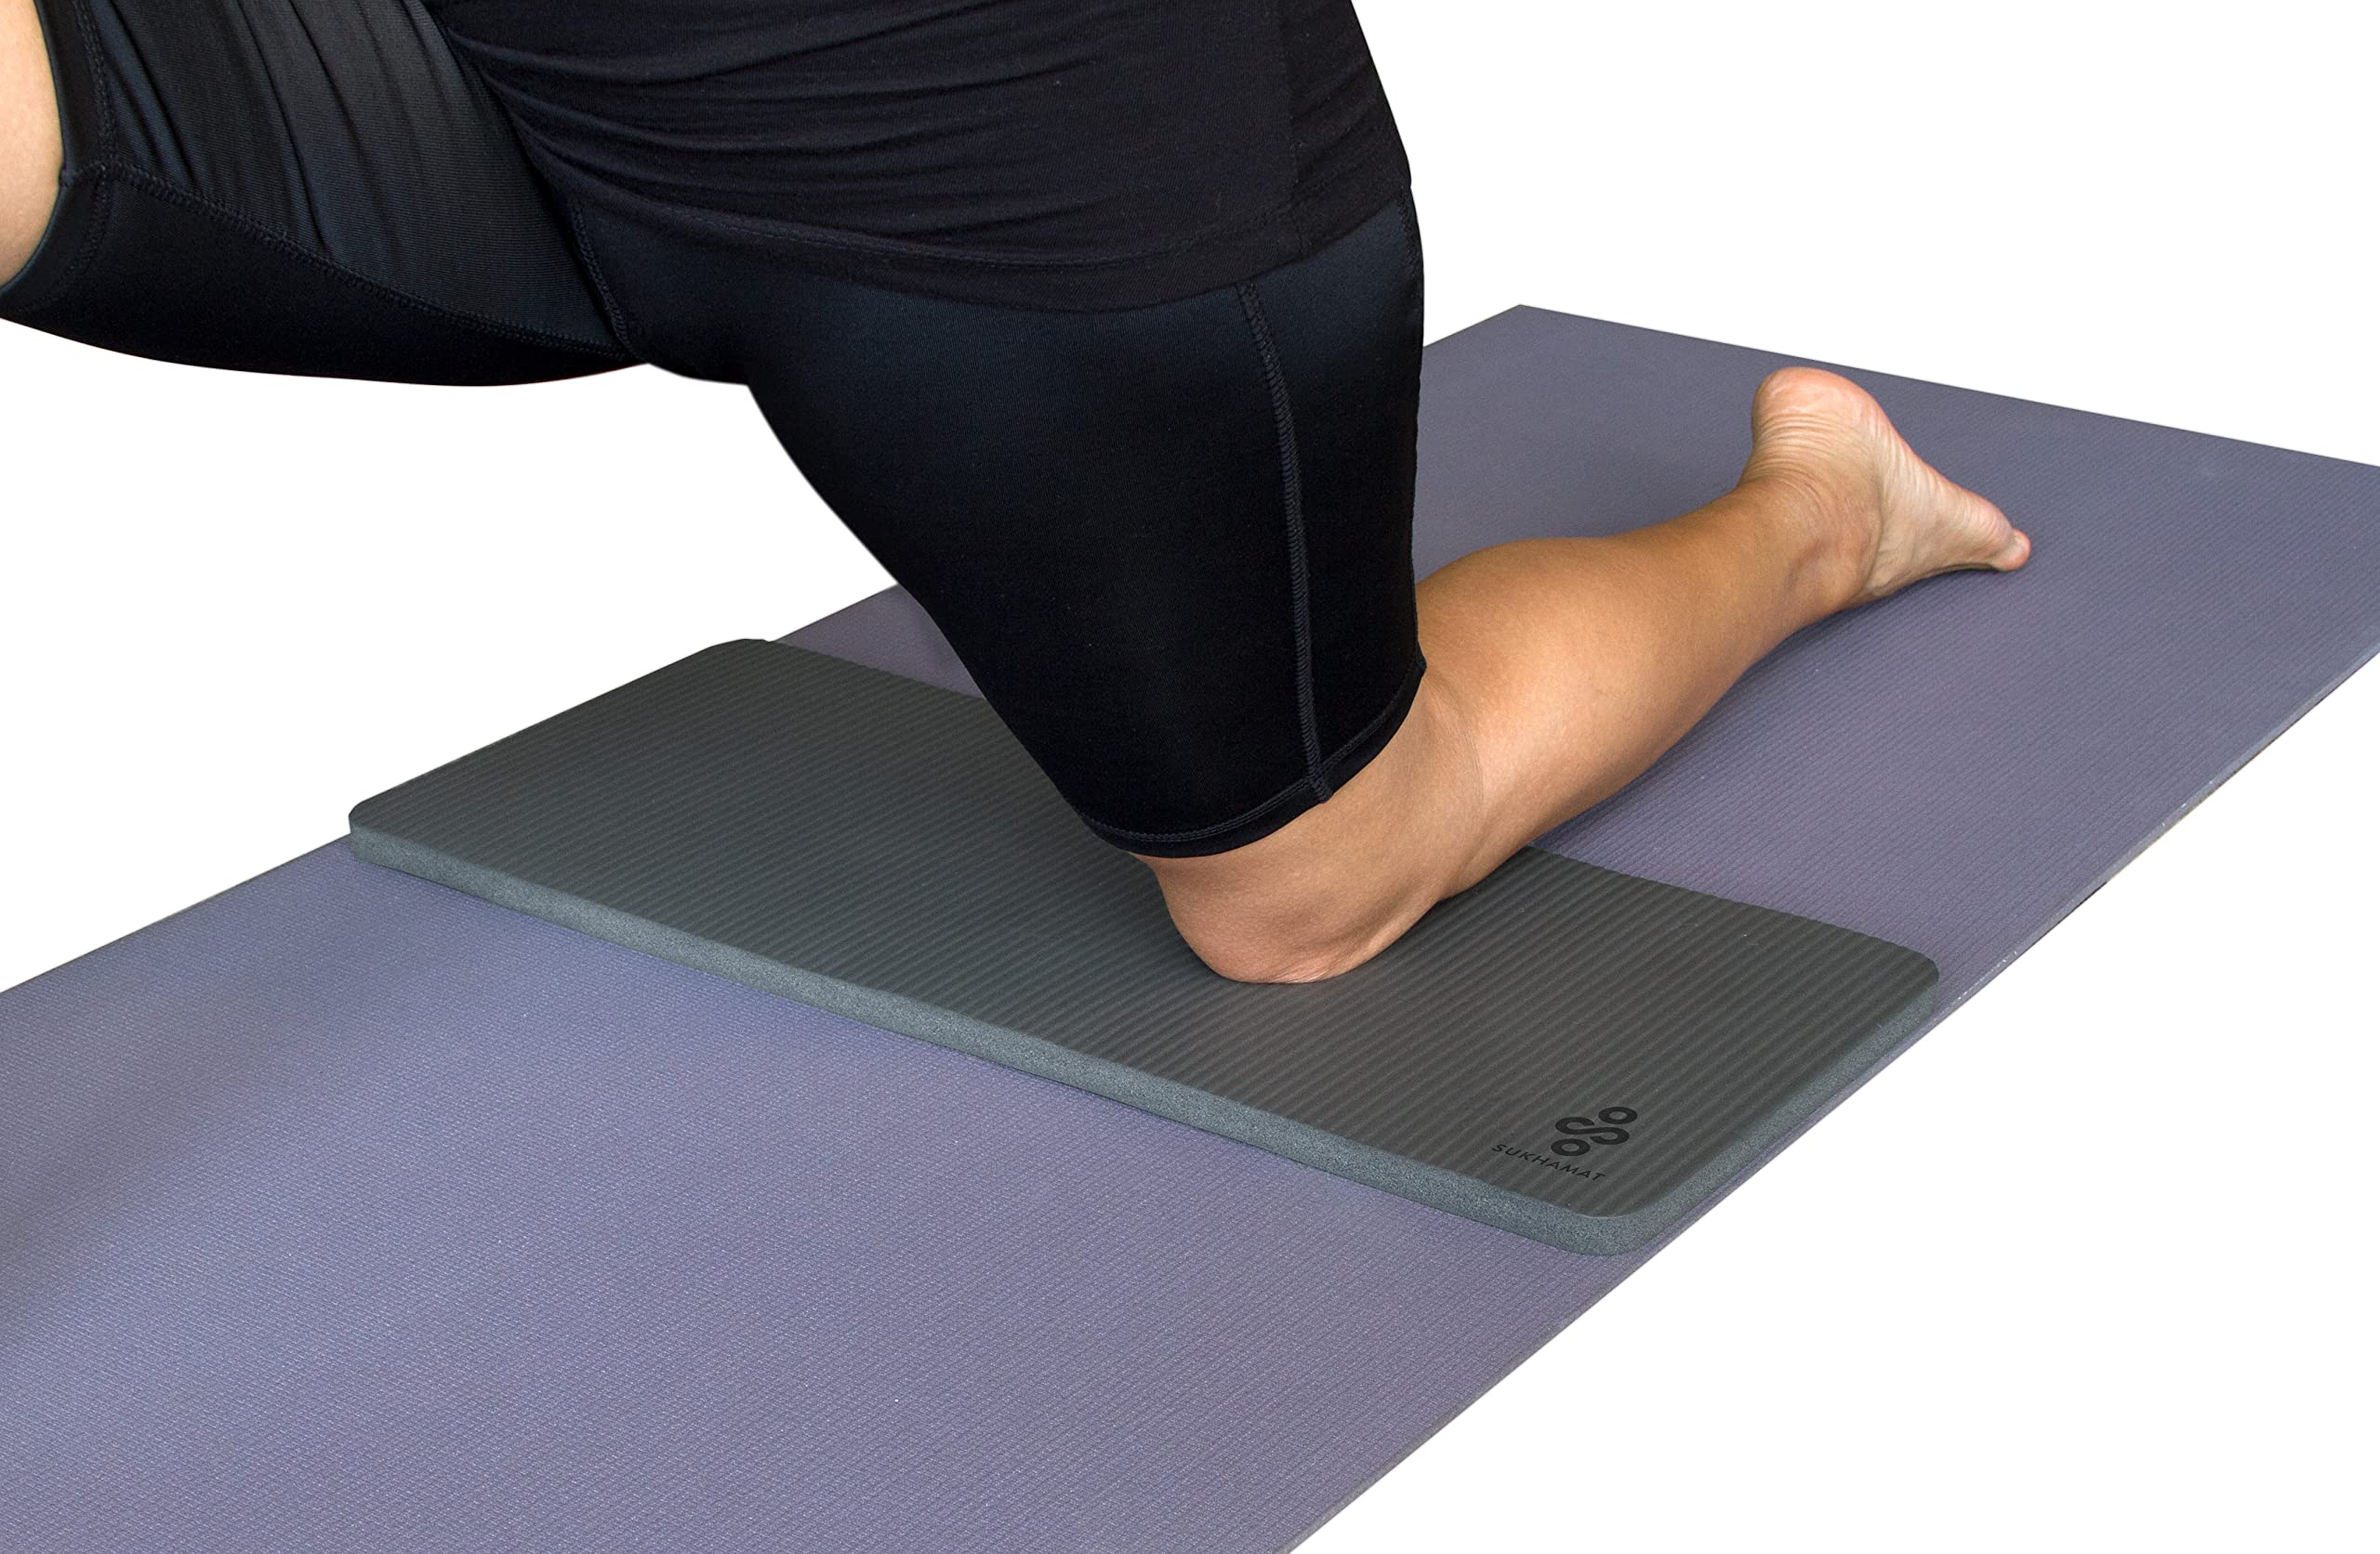 SukhaMat Yoga Knee Pad - NEW! 15mm (5/8) Thick - The best yoga knee pad  for a pain free Fitness Exercise Workout. Cushions pres